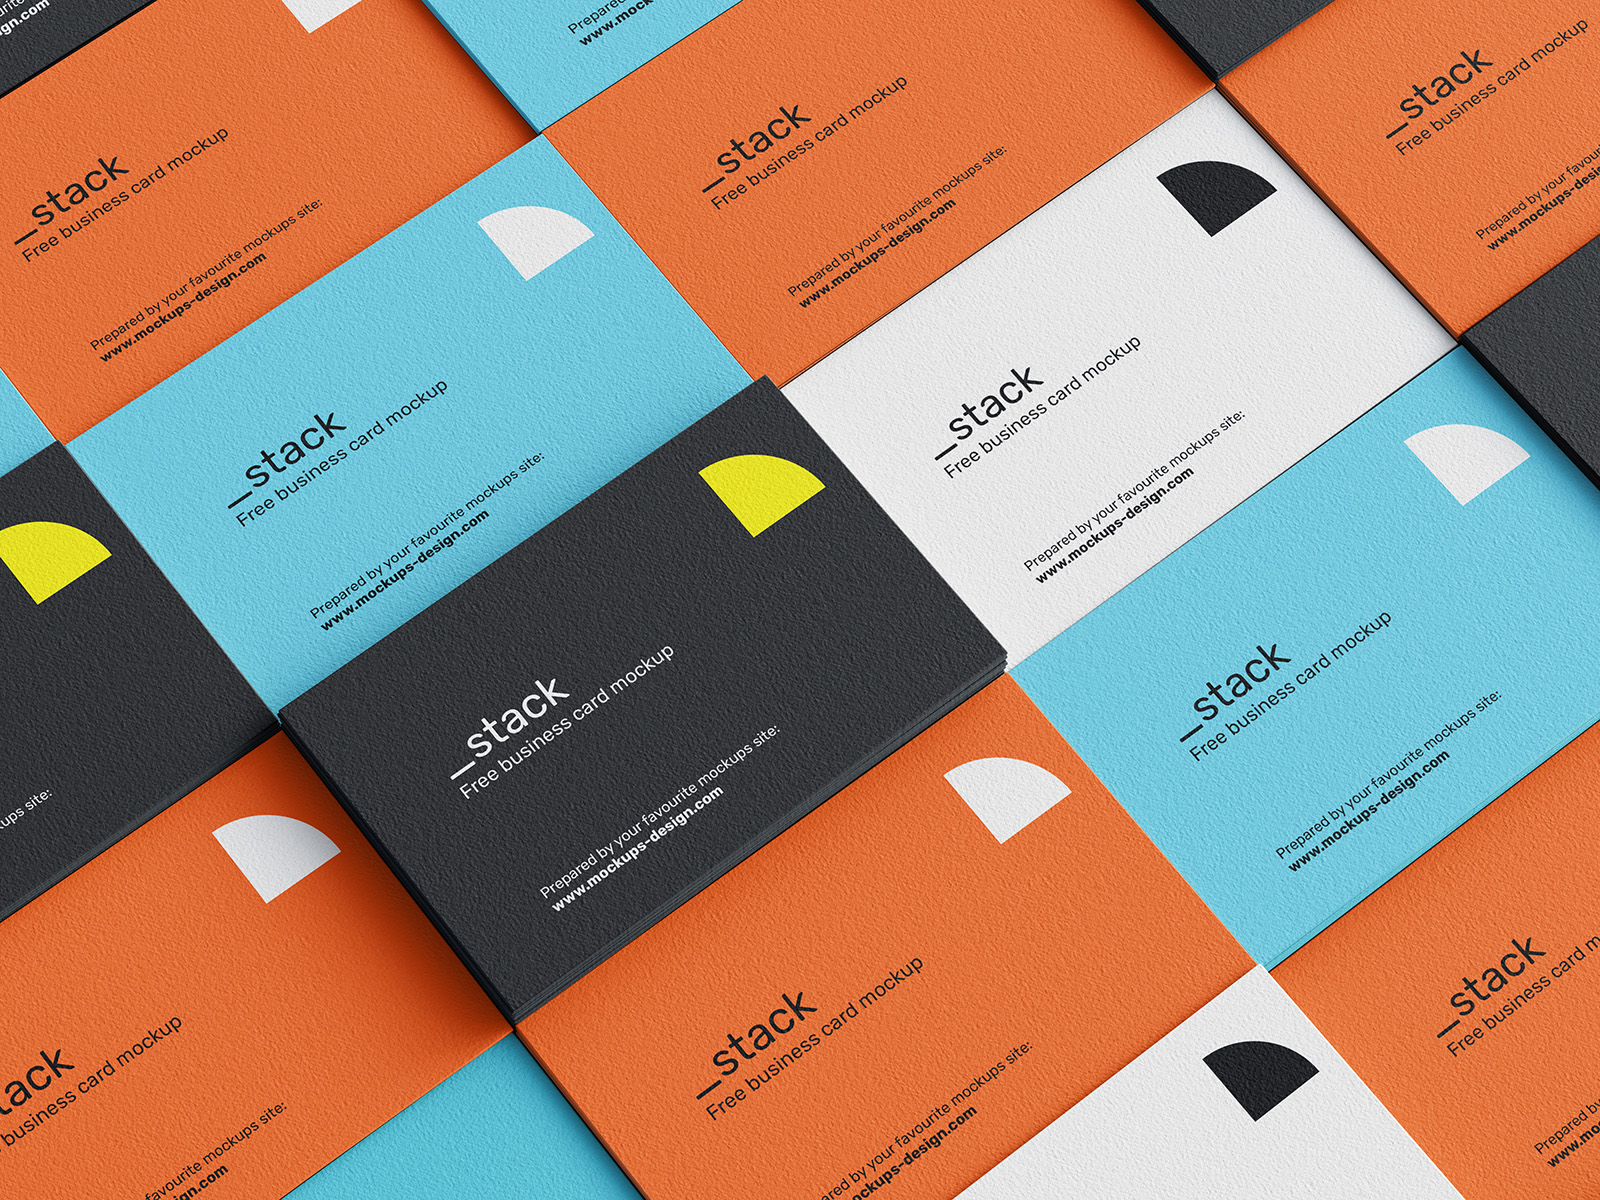 Stacked business cards mockup